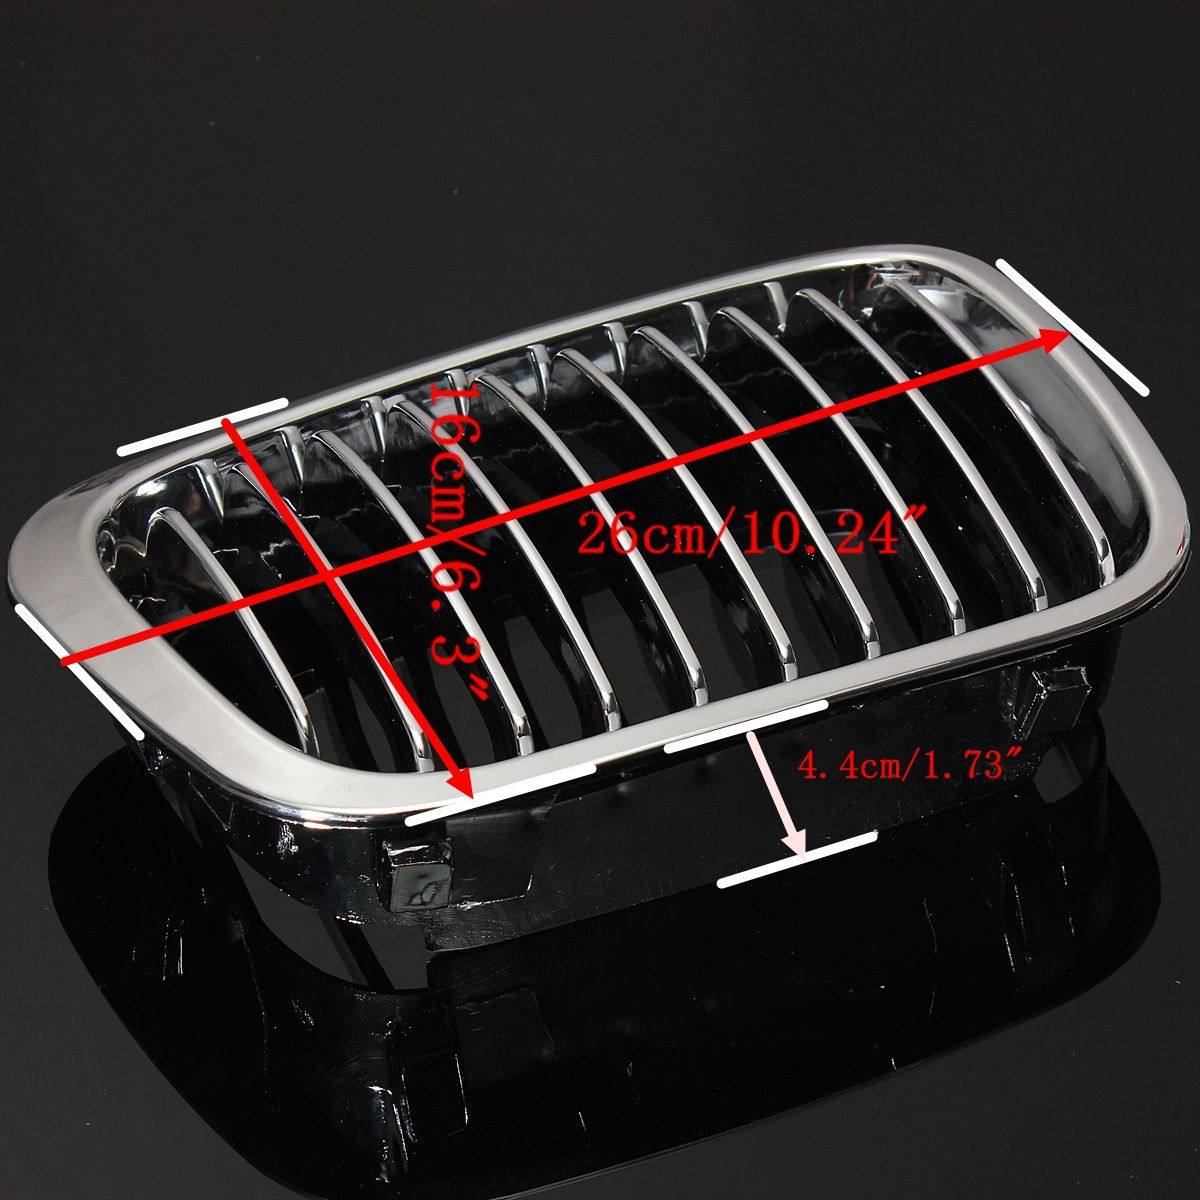 Front-Kidney-Chrome-Glossy-Grill-Grille-For-BMW-E46-3-Series-4-Door-4-DR-97-01-1049647